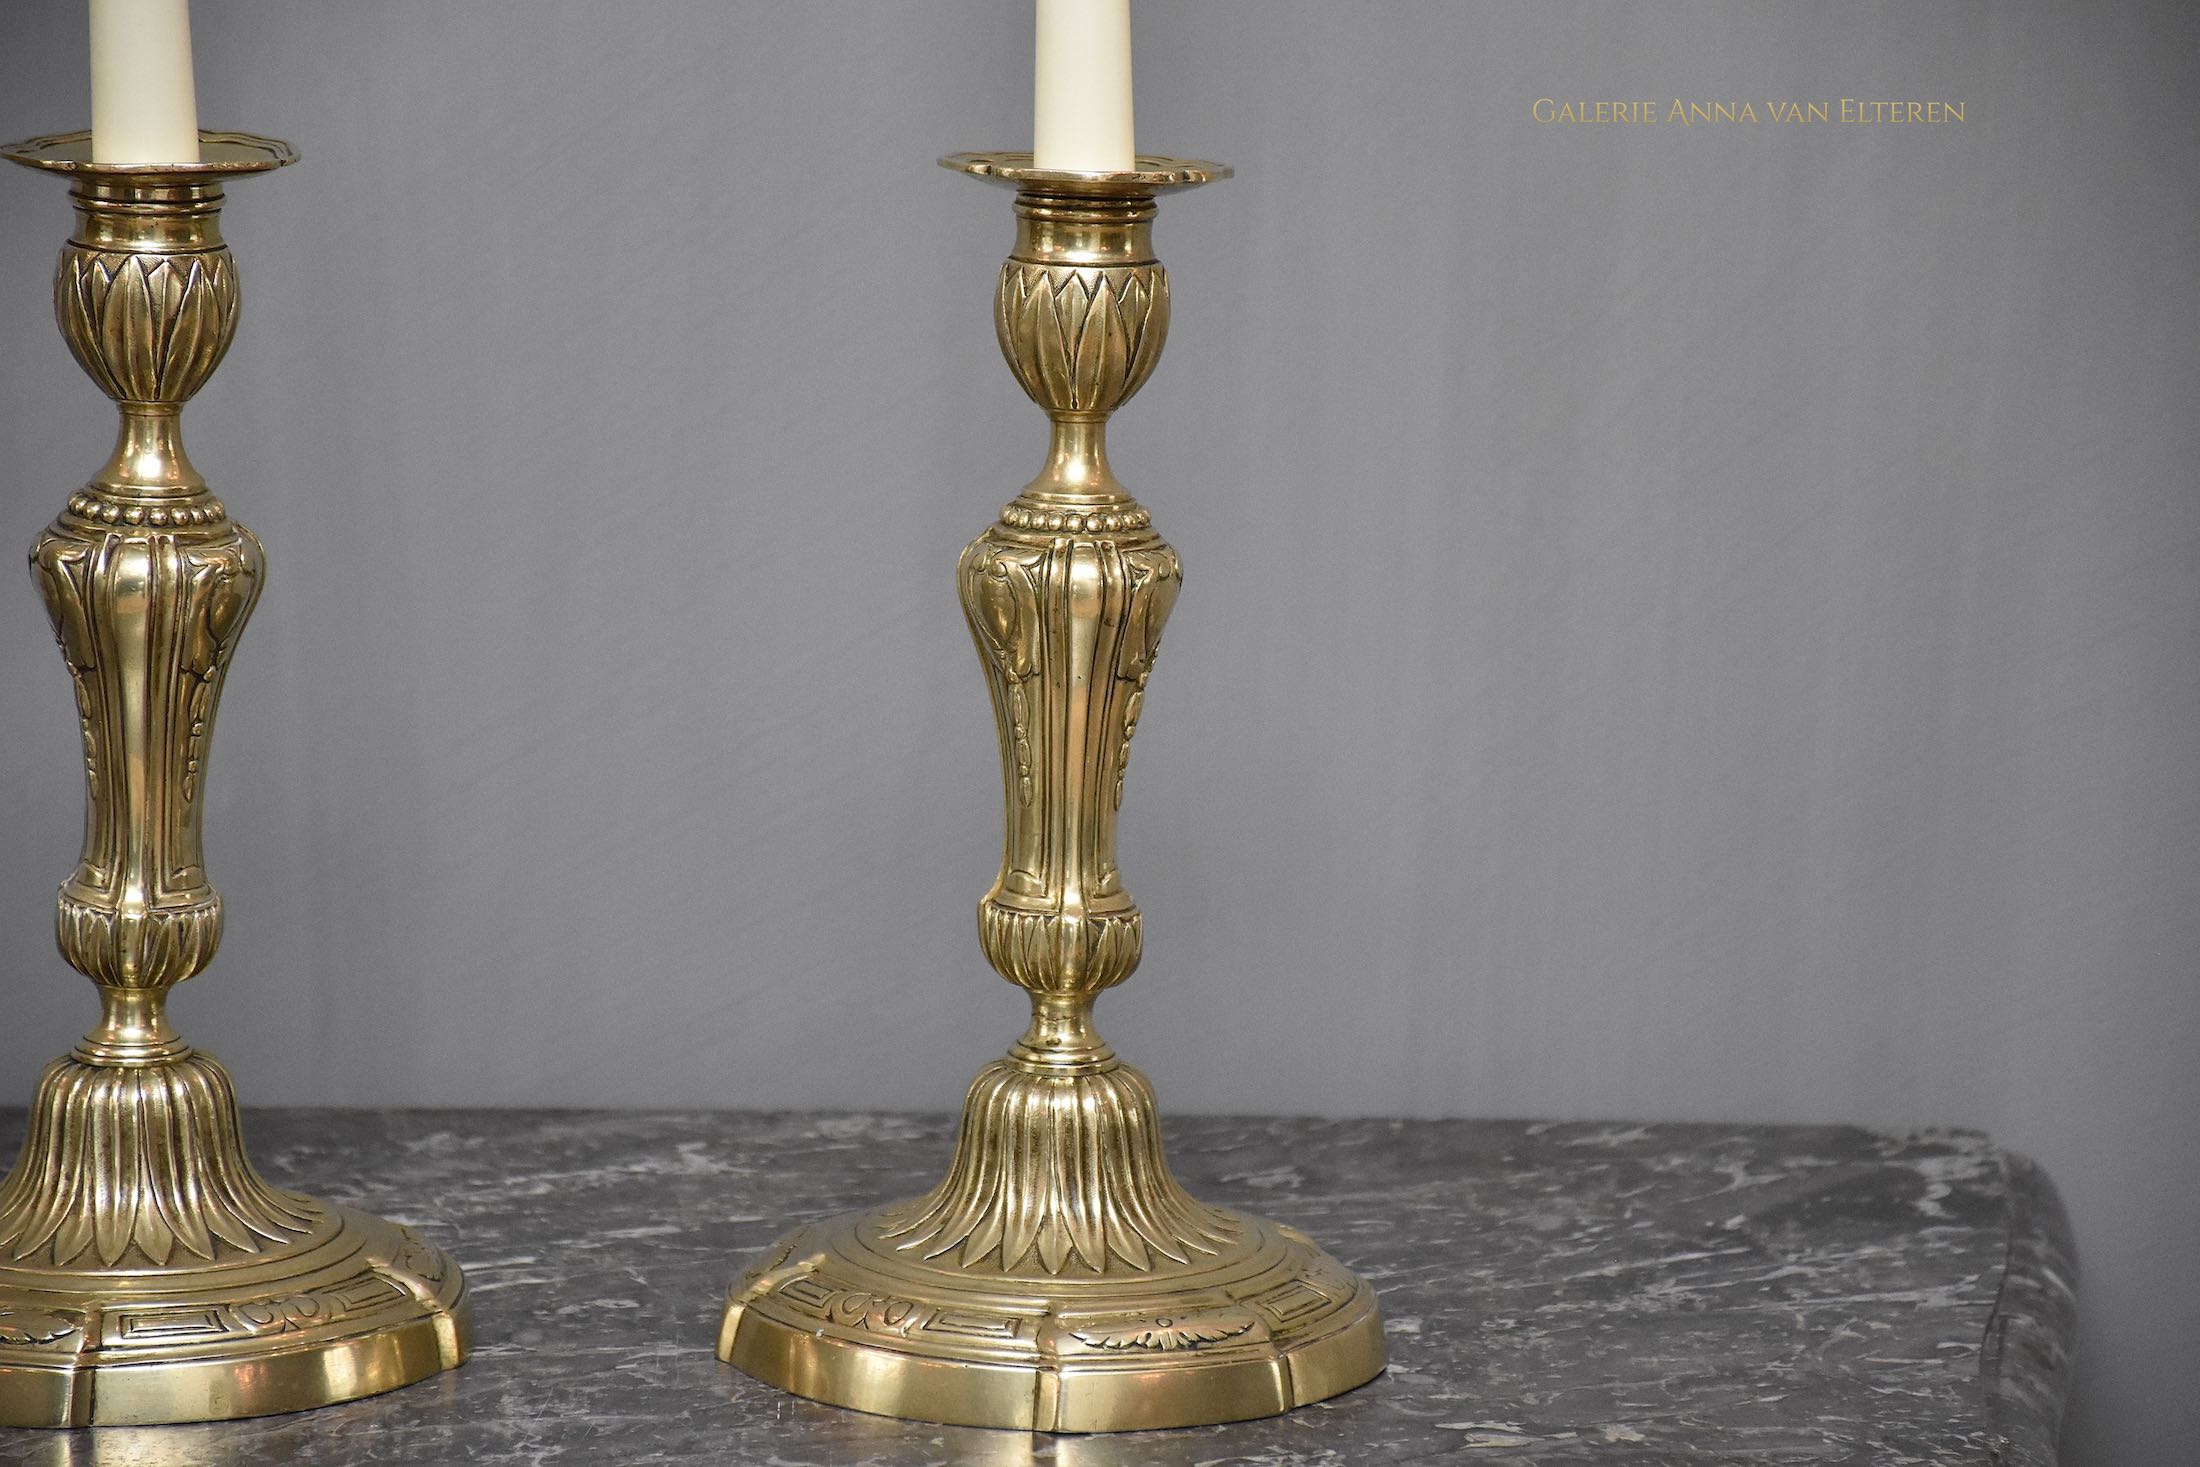 A pair of 18th c. French candlesticks Louis XVI